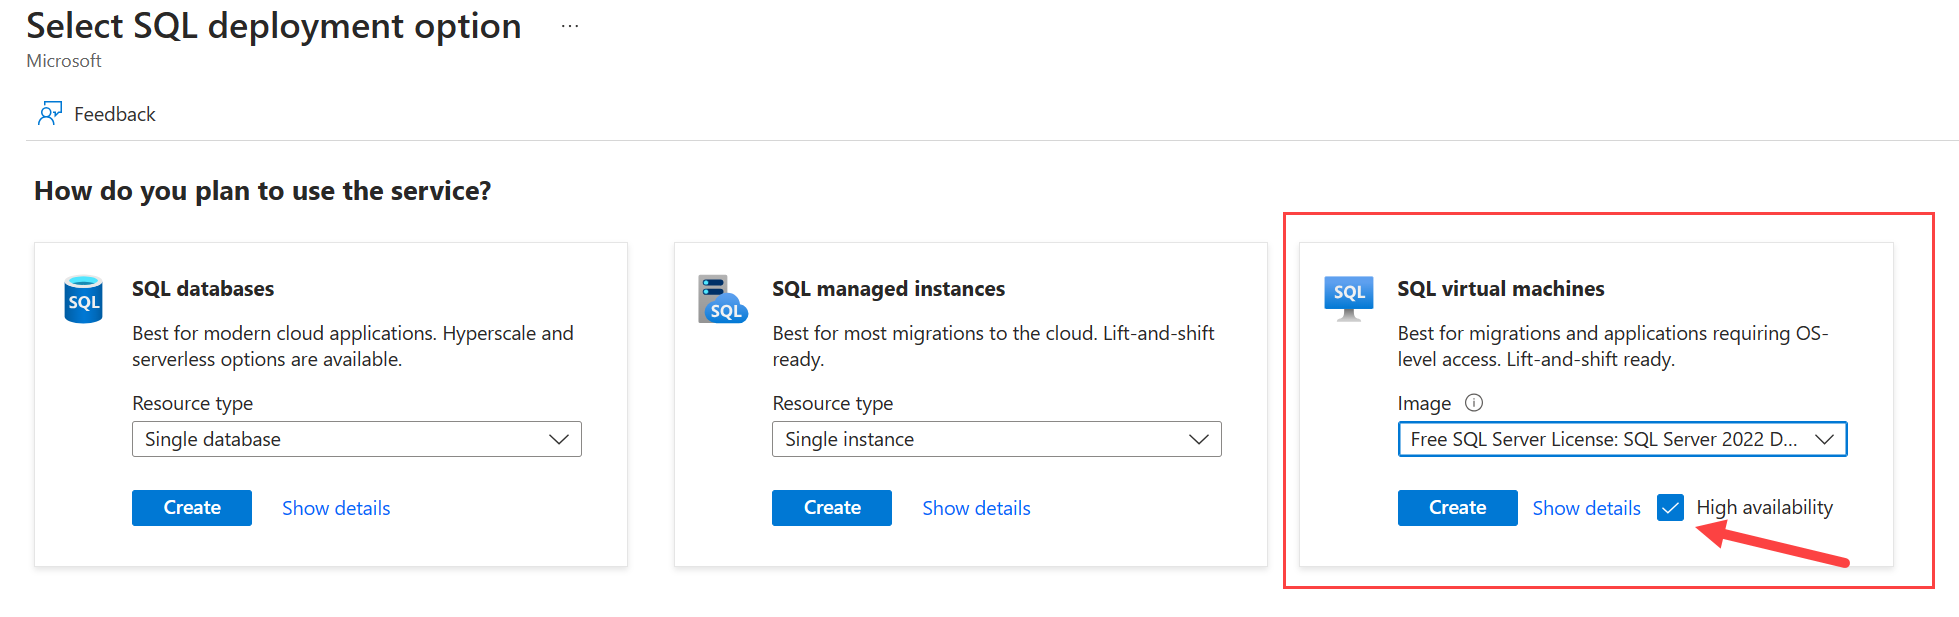 Screenshot of the Azure portal that shows the page for selecting a SQL Server deployment option, with high availability selected. 